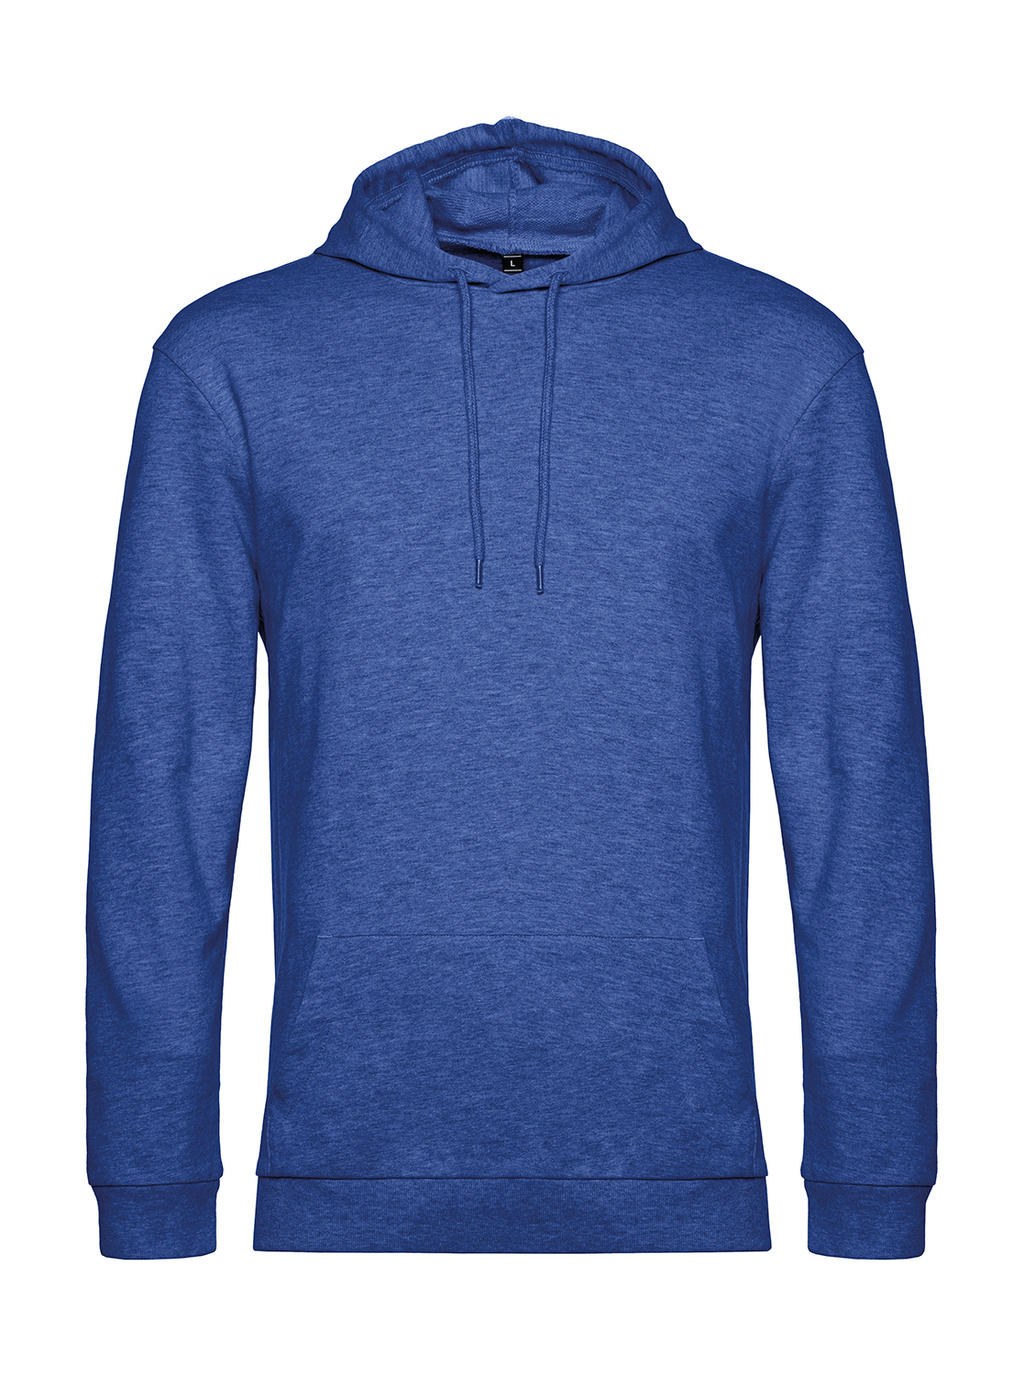  #Hoodie French Terry in Farbe Heather Royal Blue